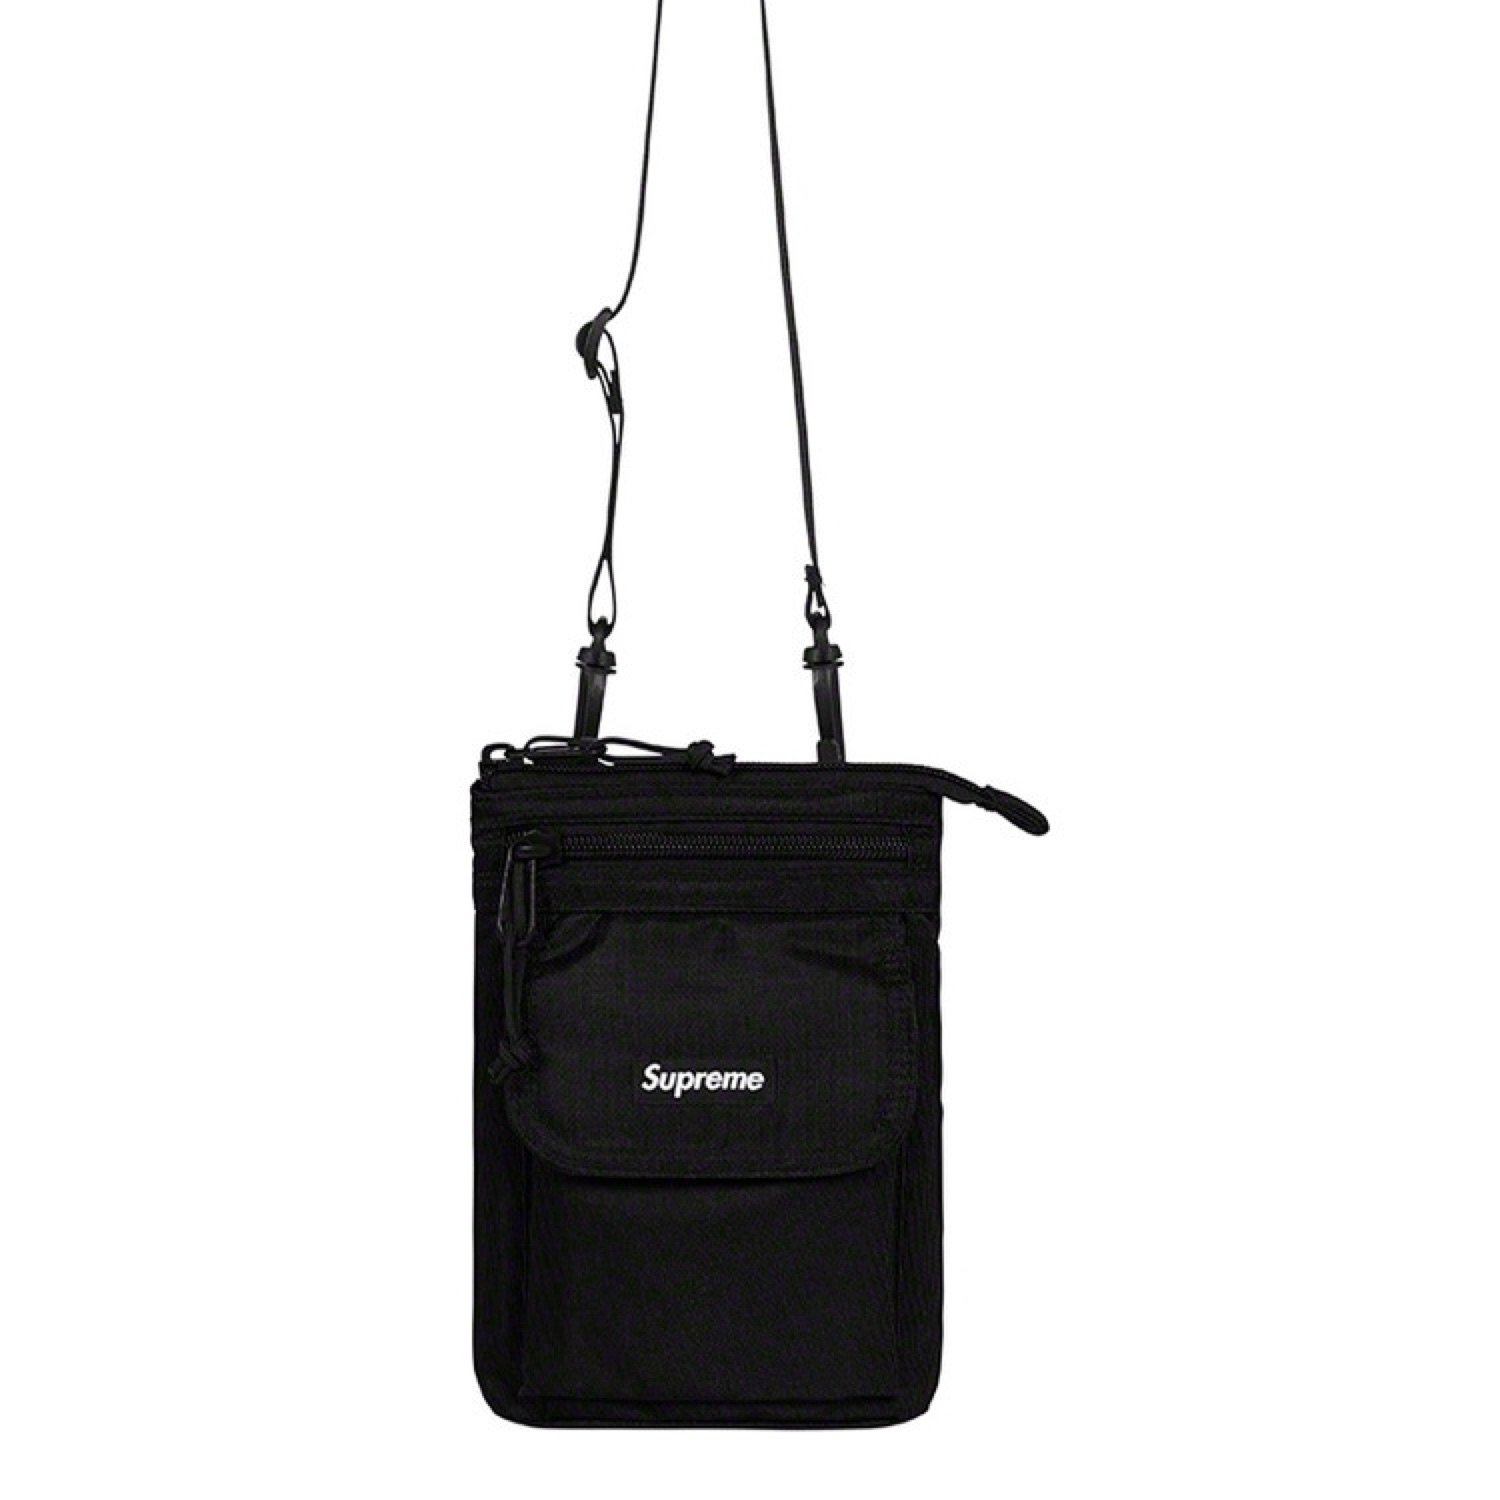 SUPREME X LACOSTE - WAIST BAG BLACK | Limited Edition by OpenLab